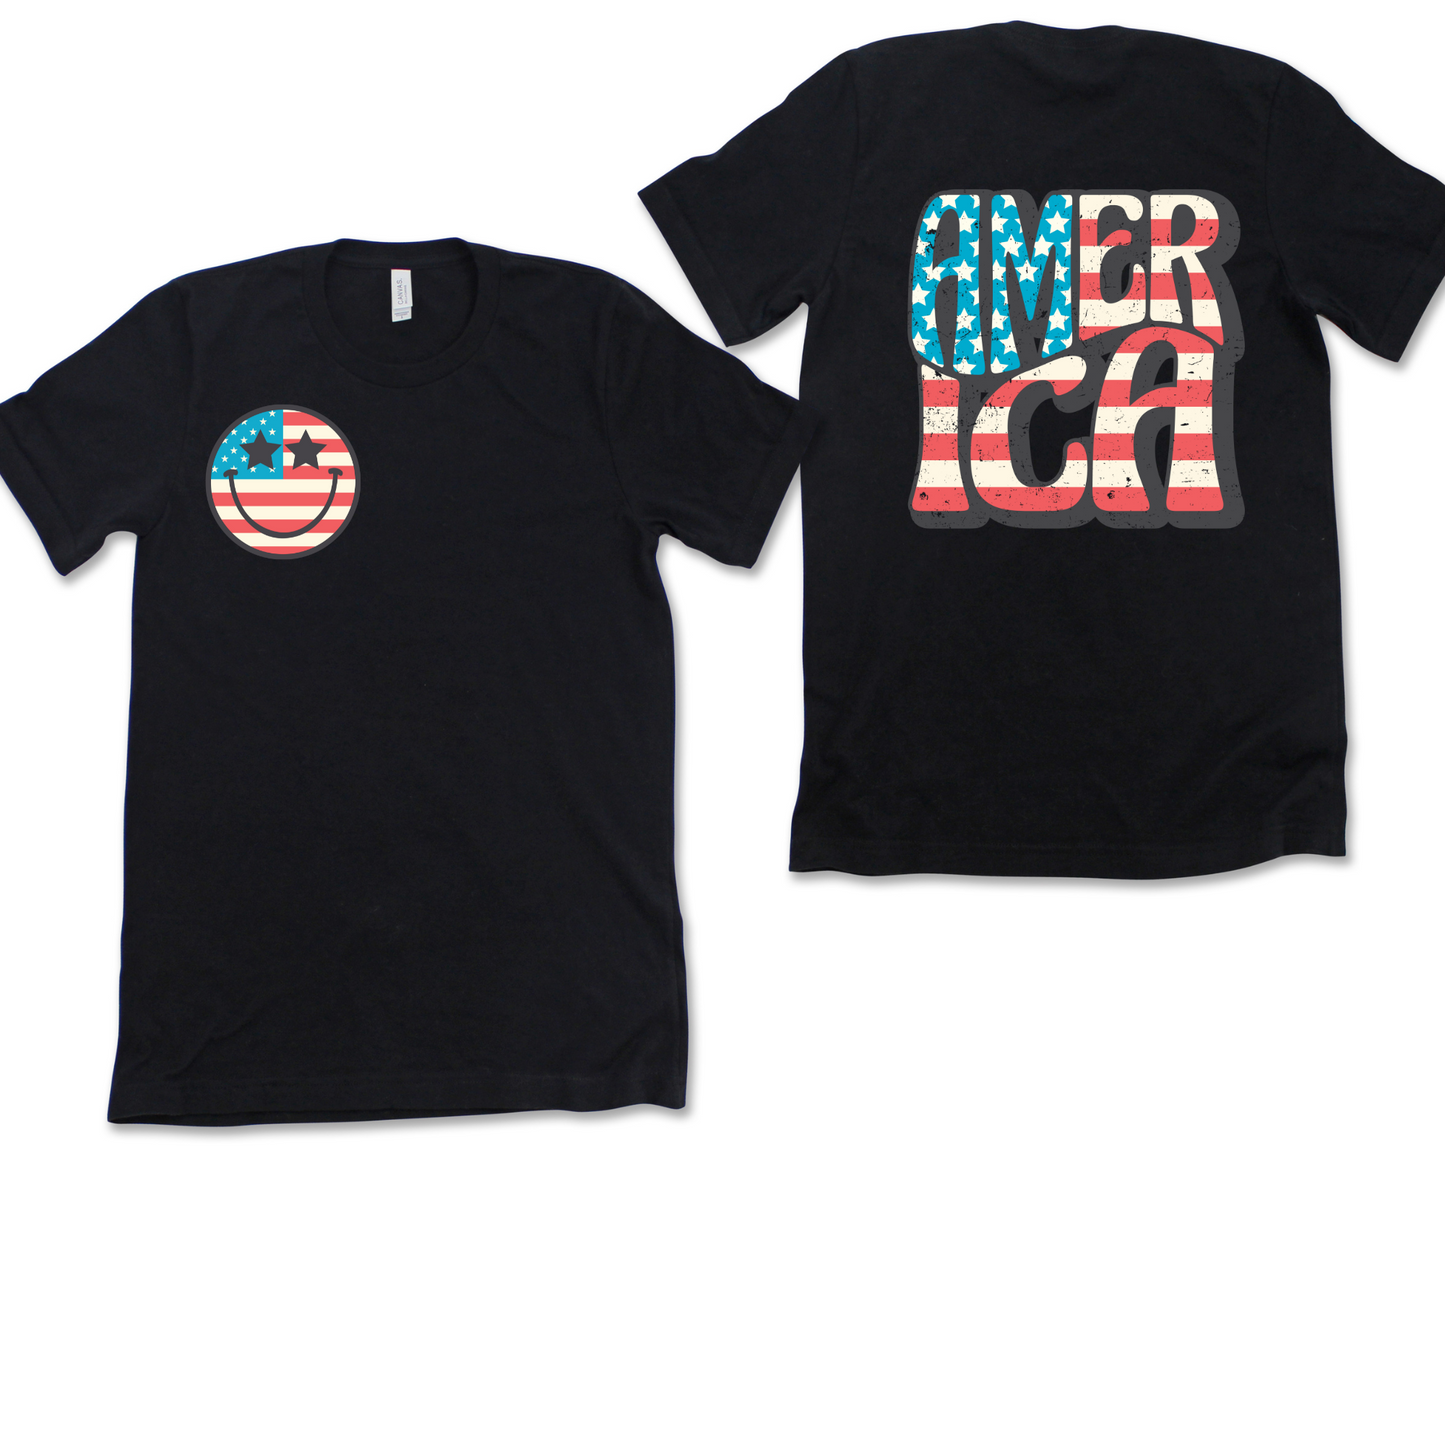 America Retro with Smiley Face on Front- Graphic Tee